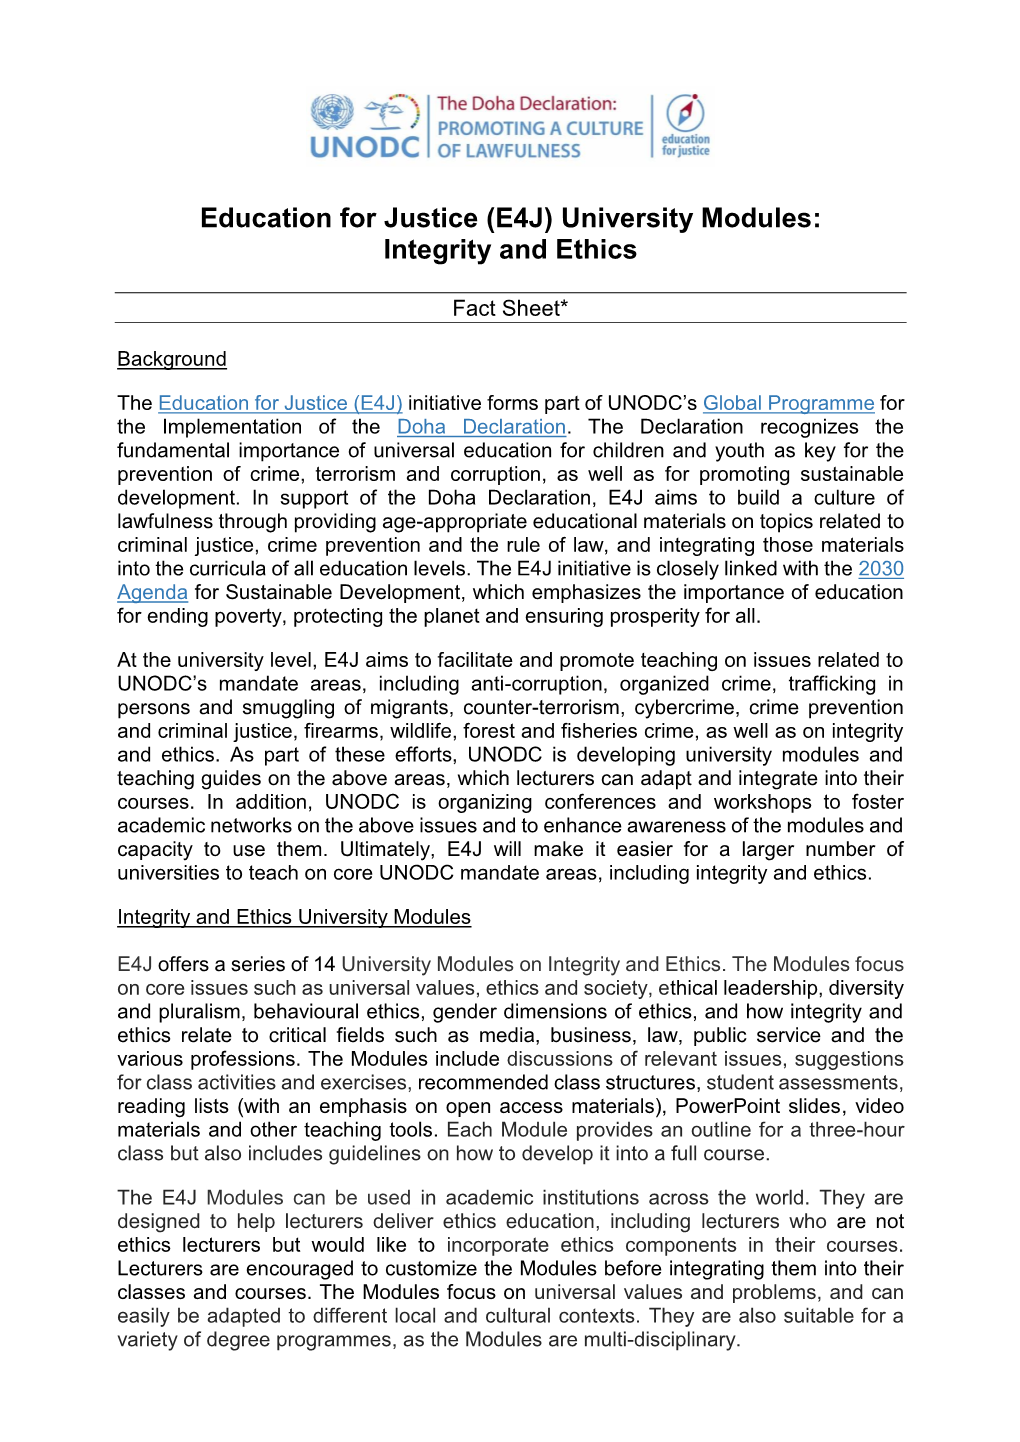 Education for Justice (E4J) University Modules: Integrity and Ethics